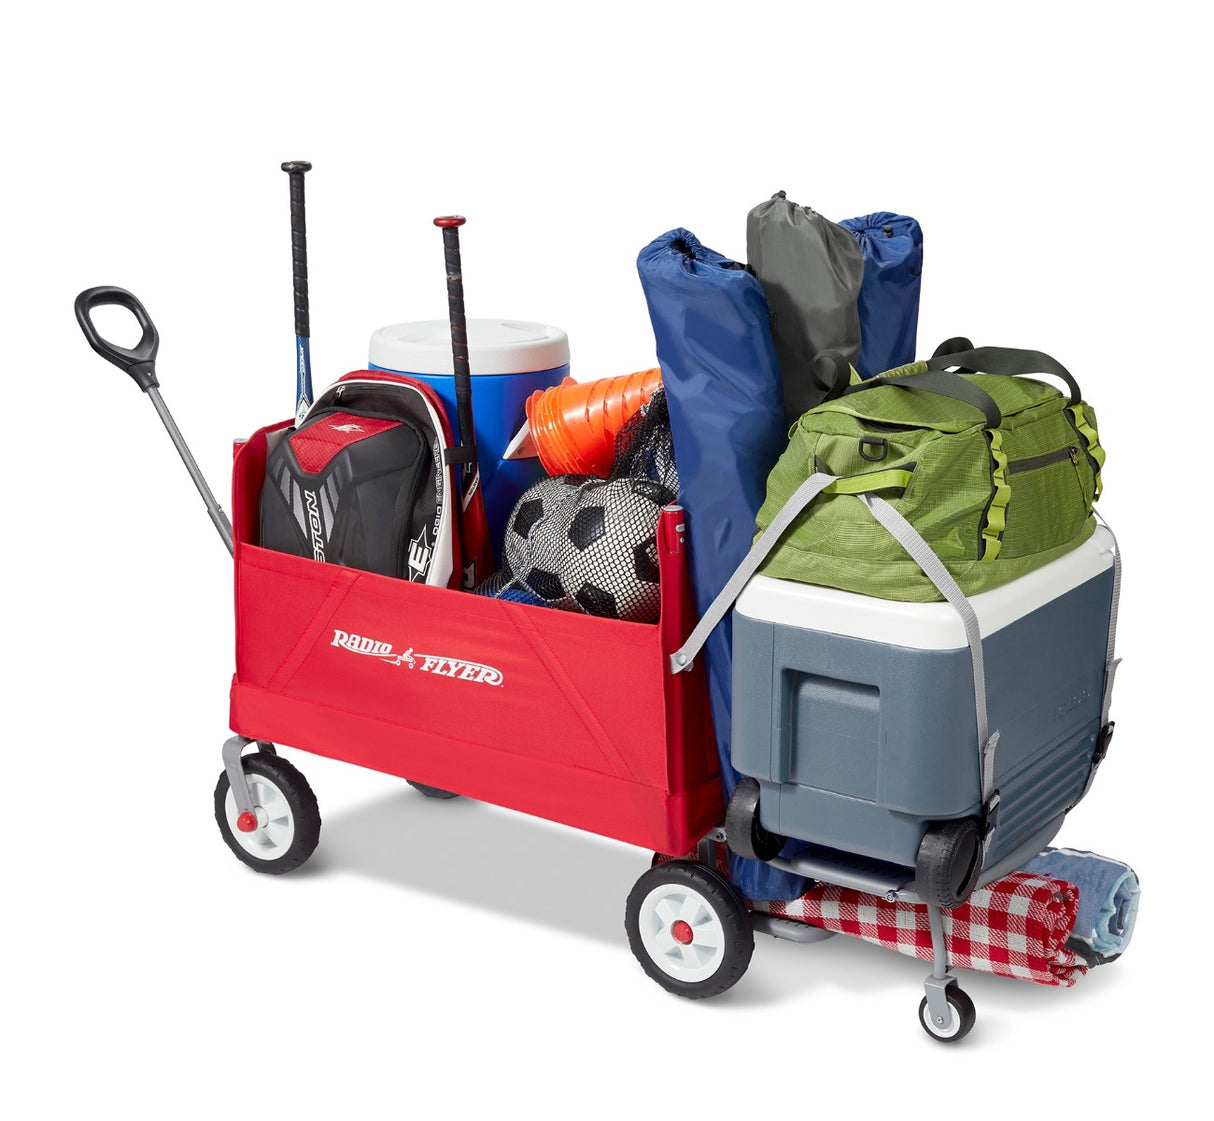 3-In-1 Tailgater Wagon® With Canopy Hauling Capability